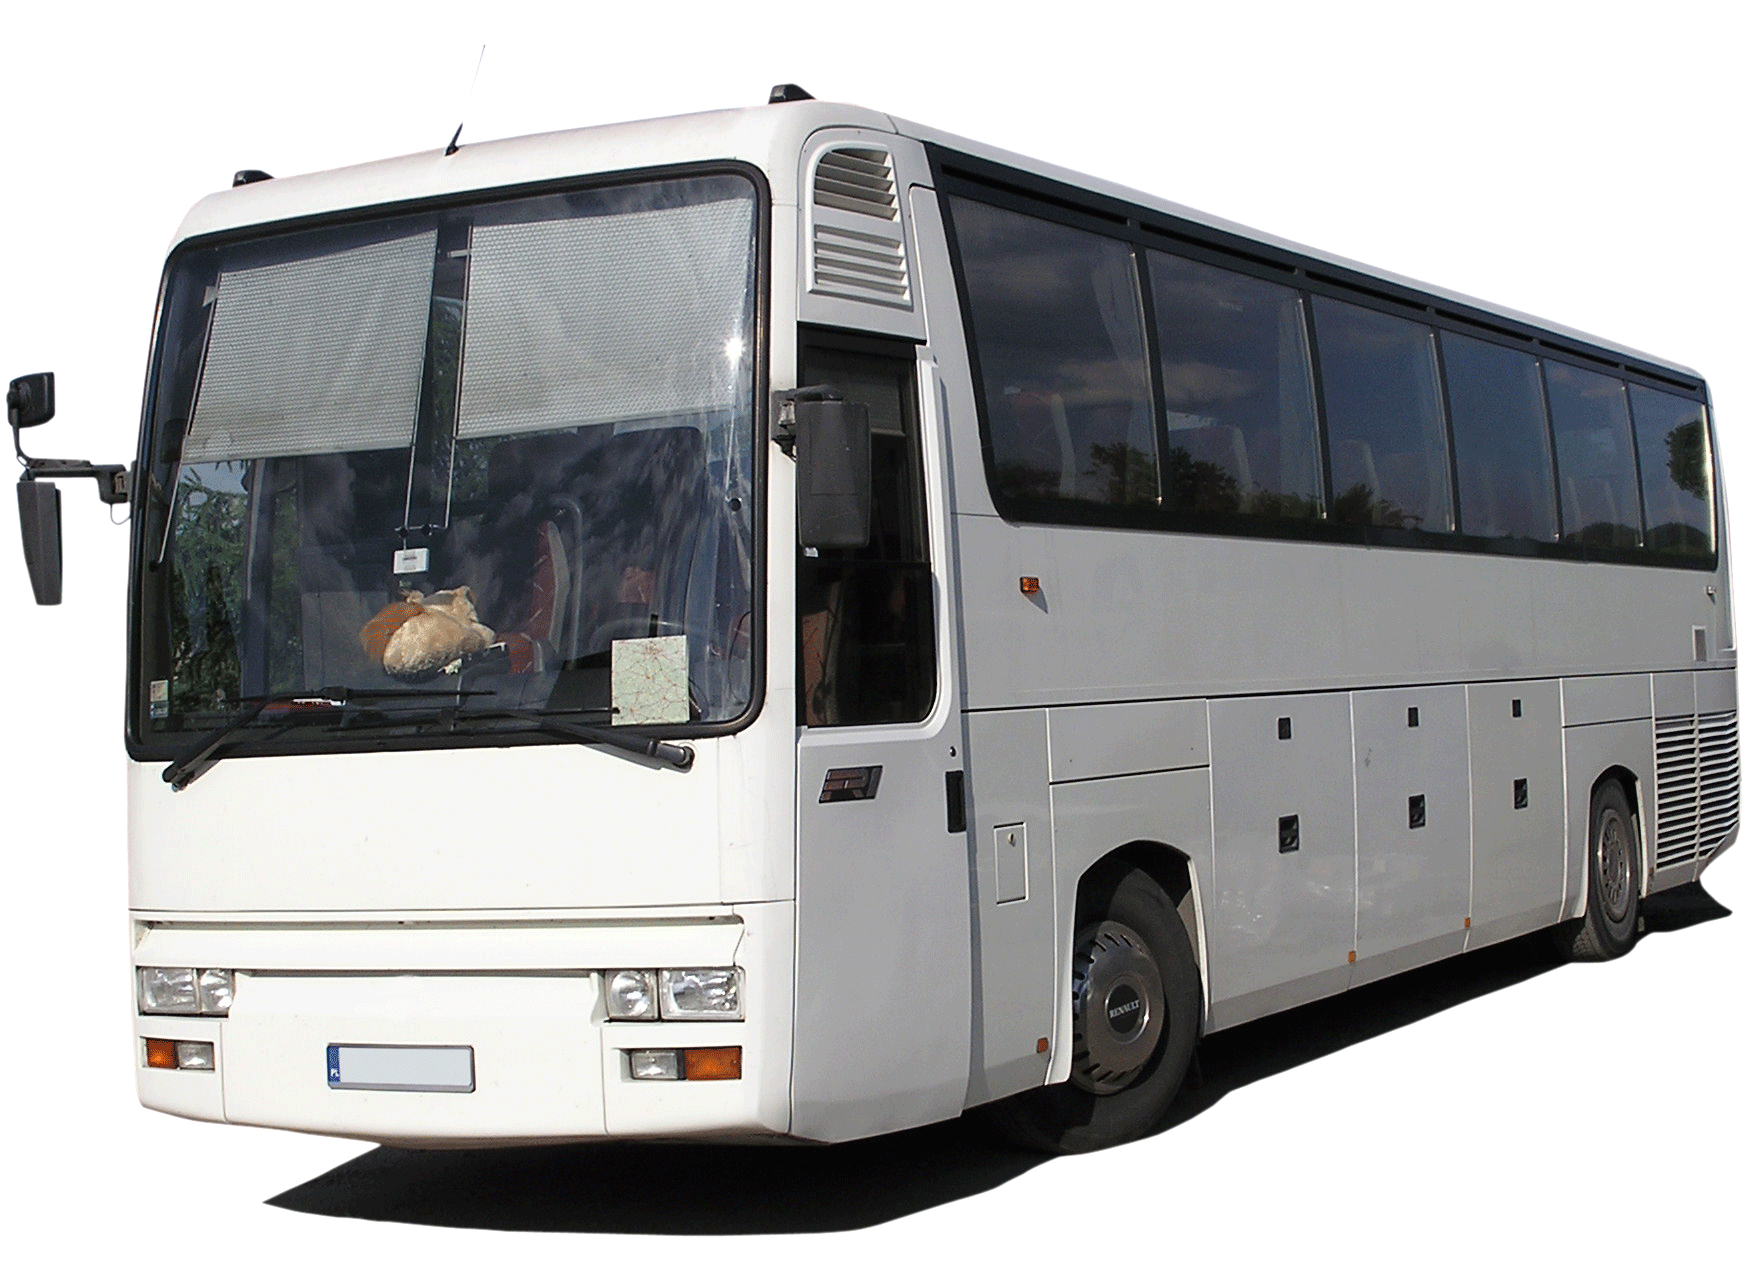 Shuttle Bus Limo | Free Image